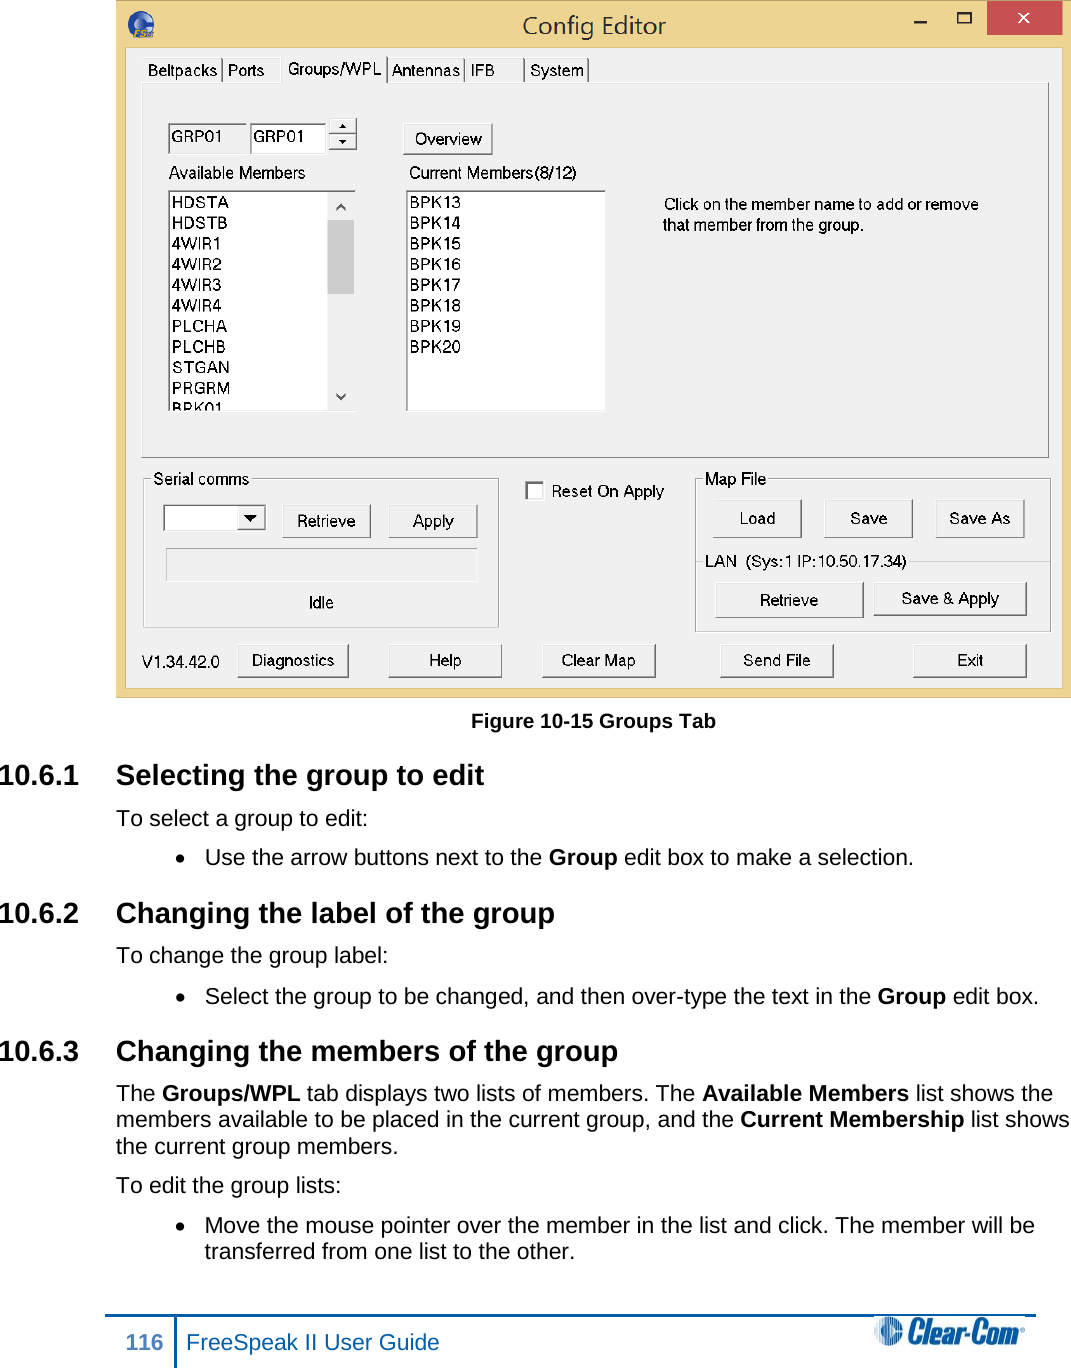   Figure 10-15 Groups Tab 10.6.1 Selecting the group to edit To select a group to edit: • Use the arrow buttons next to the Group edit box to make a selection. 10.6.2 Changing the label of the group To change the group label: • Select the group to be changed, and then over-type the text in the Group edit box. 10.6.3 Changing the members of the group The Groups/WPL tab displays two lists of members. The Available Members list shows the members available to be placed in the current group, and the Current Membership list shows the current group members. To edit the group lists: • Move the mouse pointer over the member in the list and click. The member will be transferred from one list to the other. 116 FreeSpeak II User Guide  